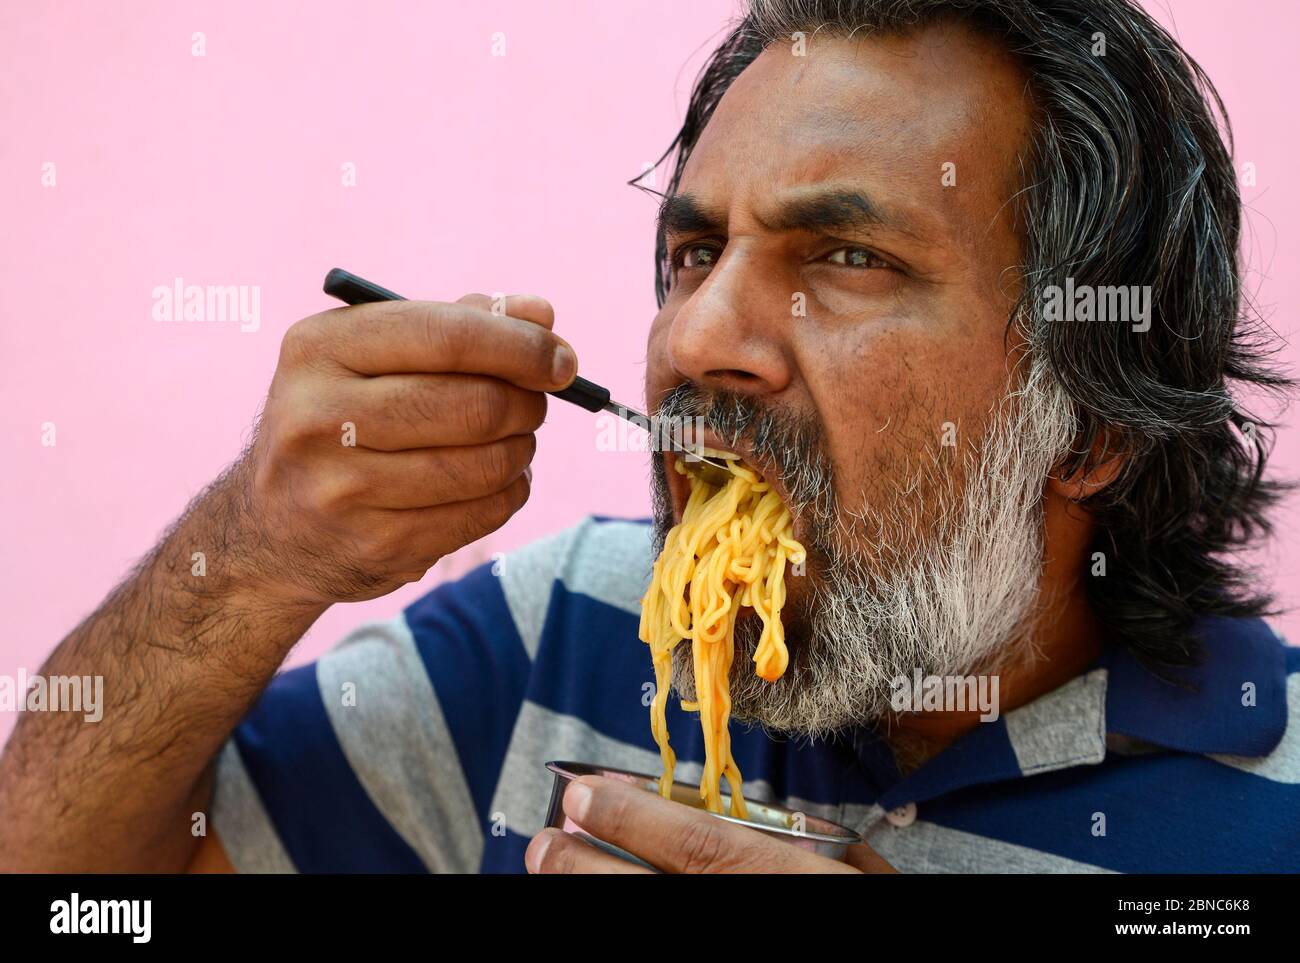 Man eating Noodles Stock Photo